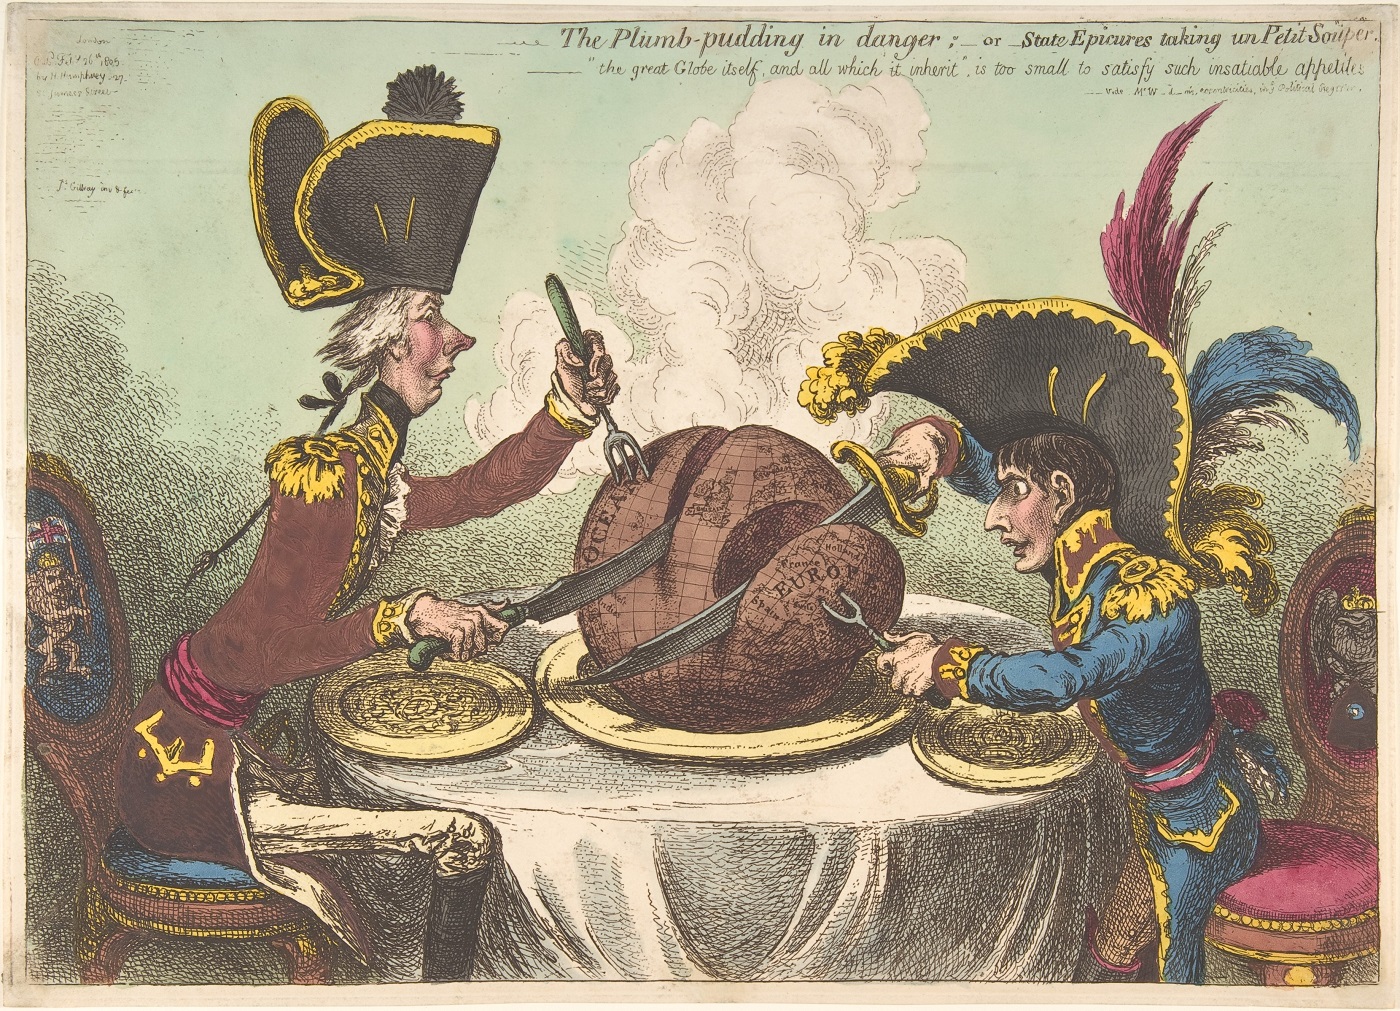 'The Plumb-pudding in danger – or – State Epicures taking un Petit Souper'. Image courtesy of The Met, New York